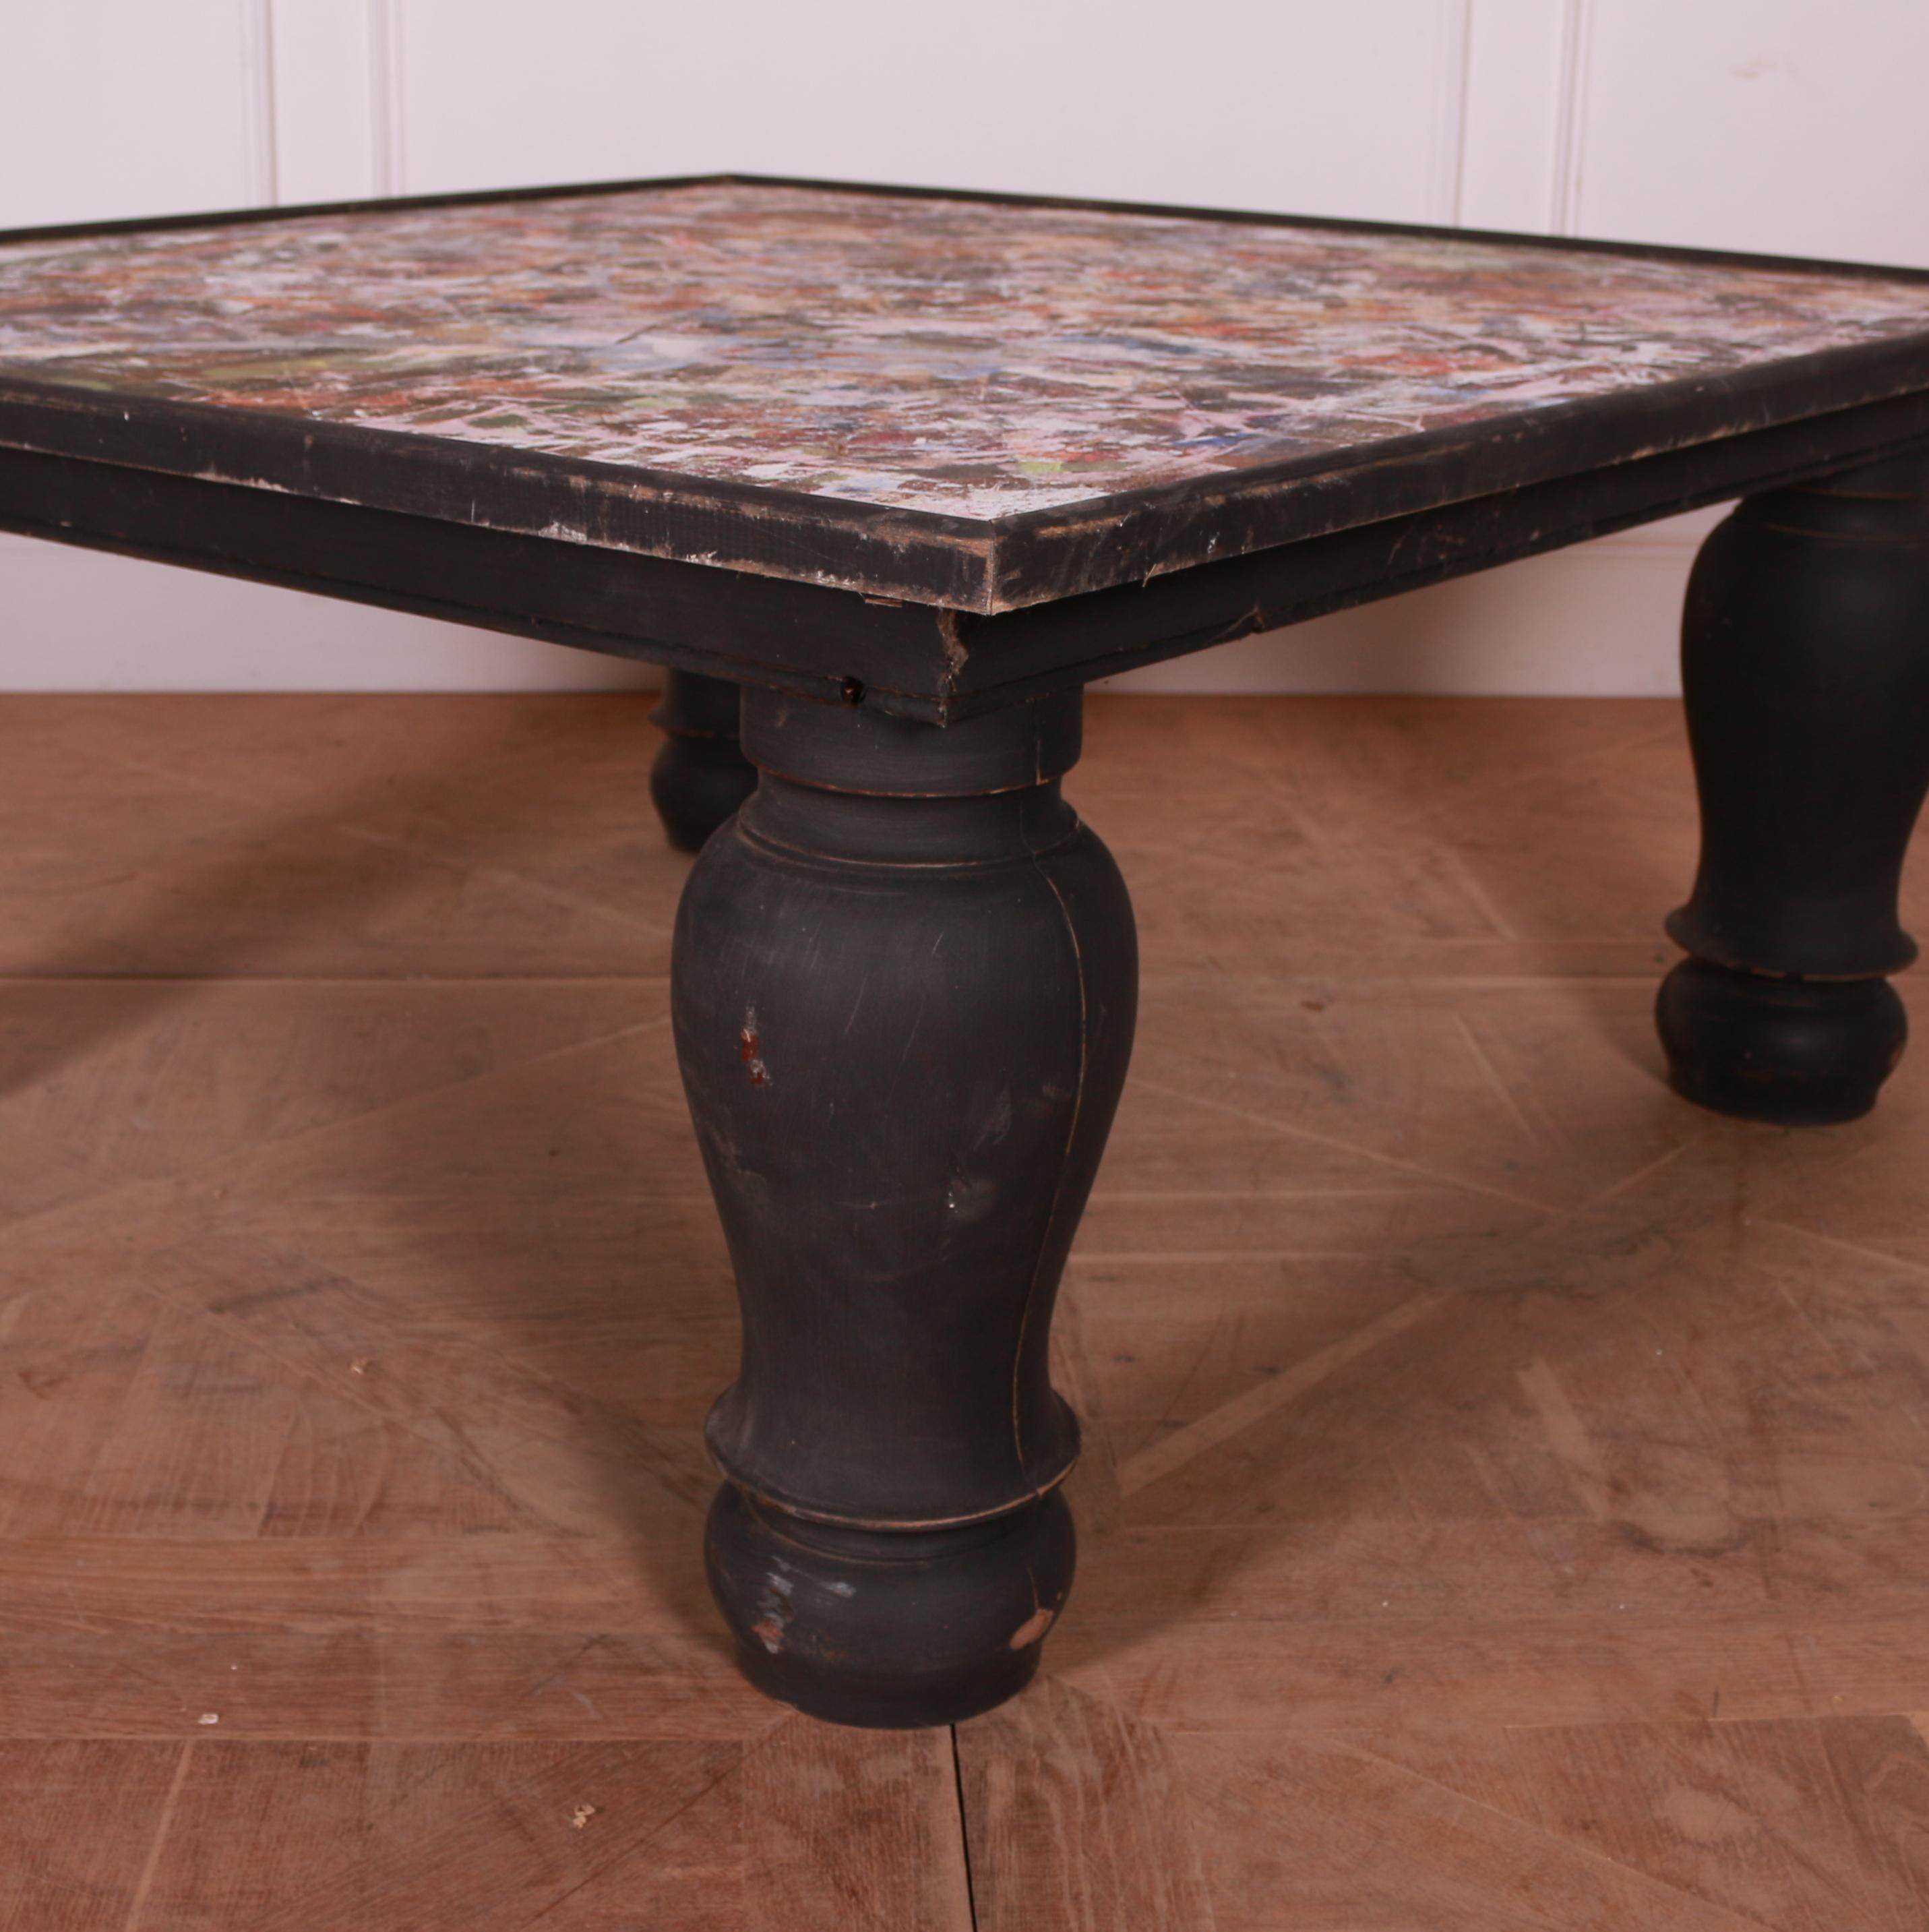 Unusual large English coffee table with an art room painted top. 1920.

Reference: 7720

Dimensions
48 inches (122 cms) Wide
48 inches (122 cms) Deep
22 inches (56 cms) High.